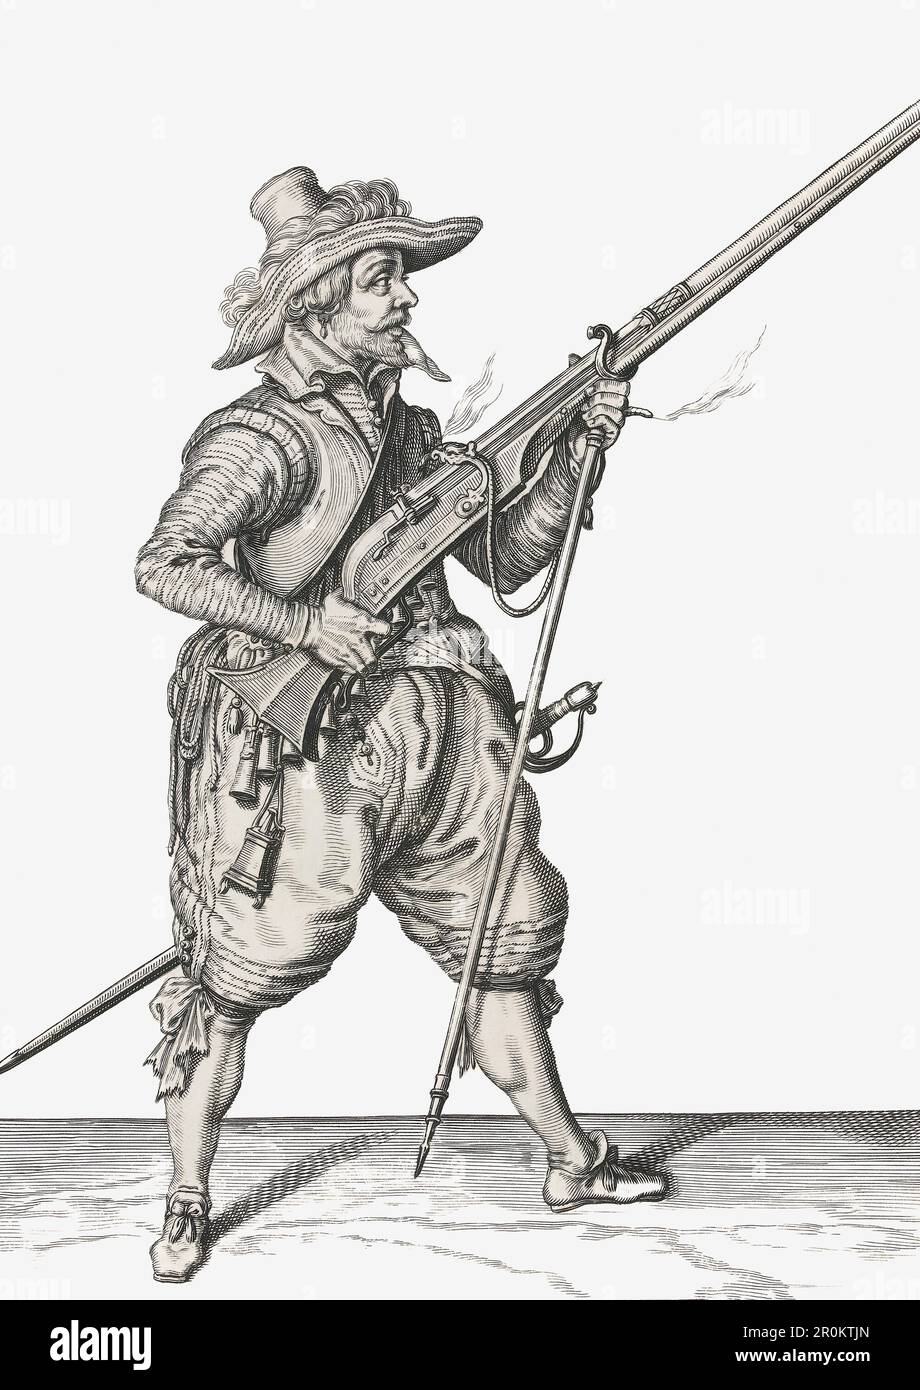 A musketeer at the ready.  From a series of over forty stages a 17th century musketeer had to follow when preparing to fire his matchlock gun.  From a work by an unidentified artist, Stock Photo